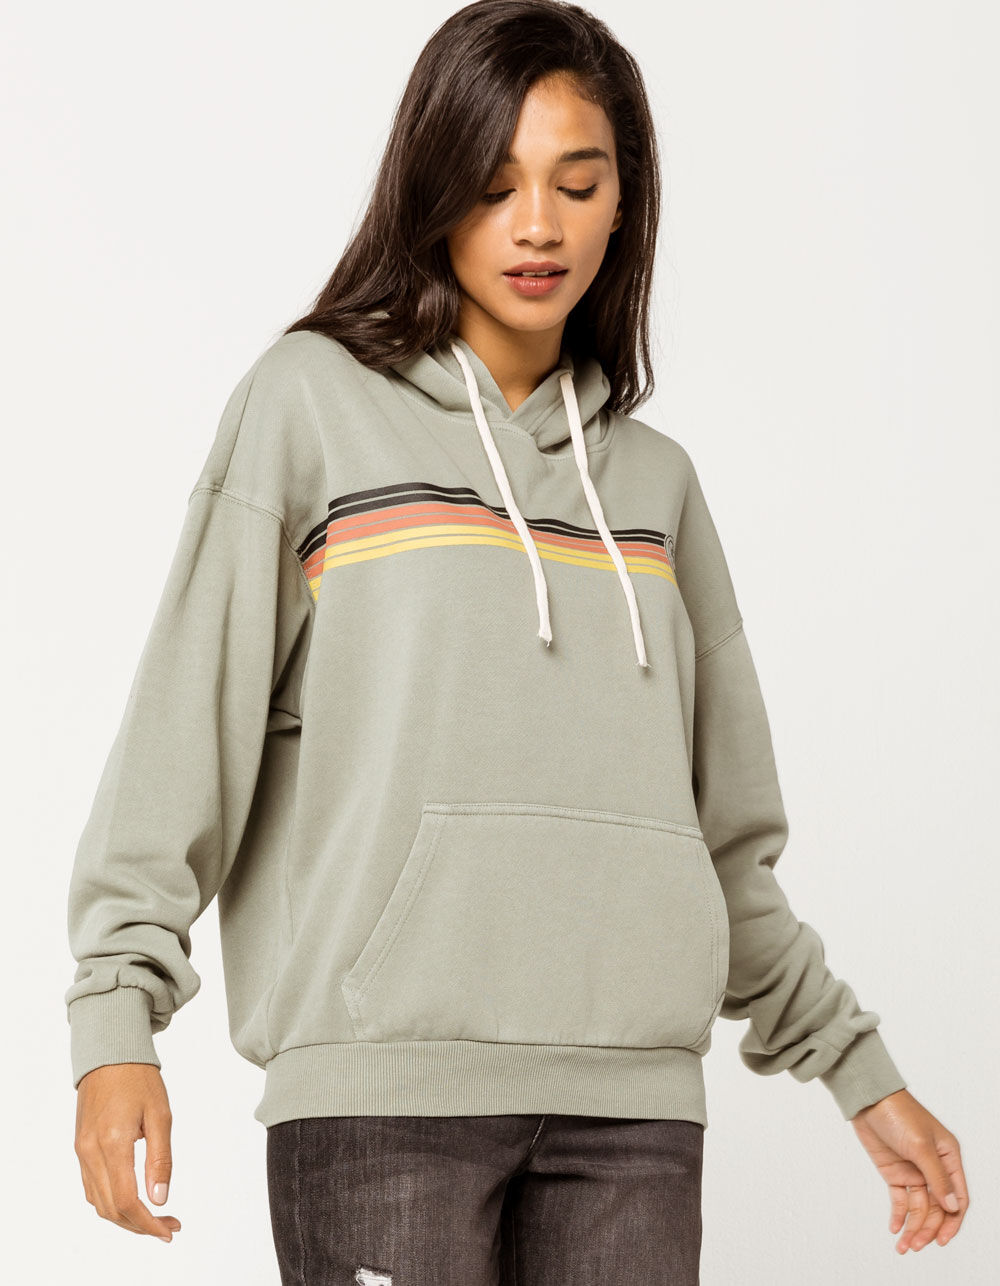 O'NEILL Pismo Womens Hoodie - SAGE | Tillys